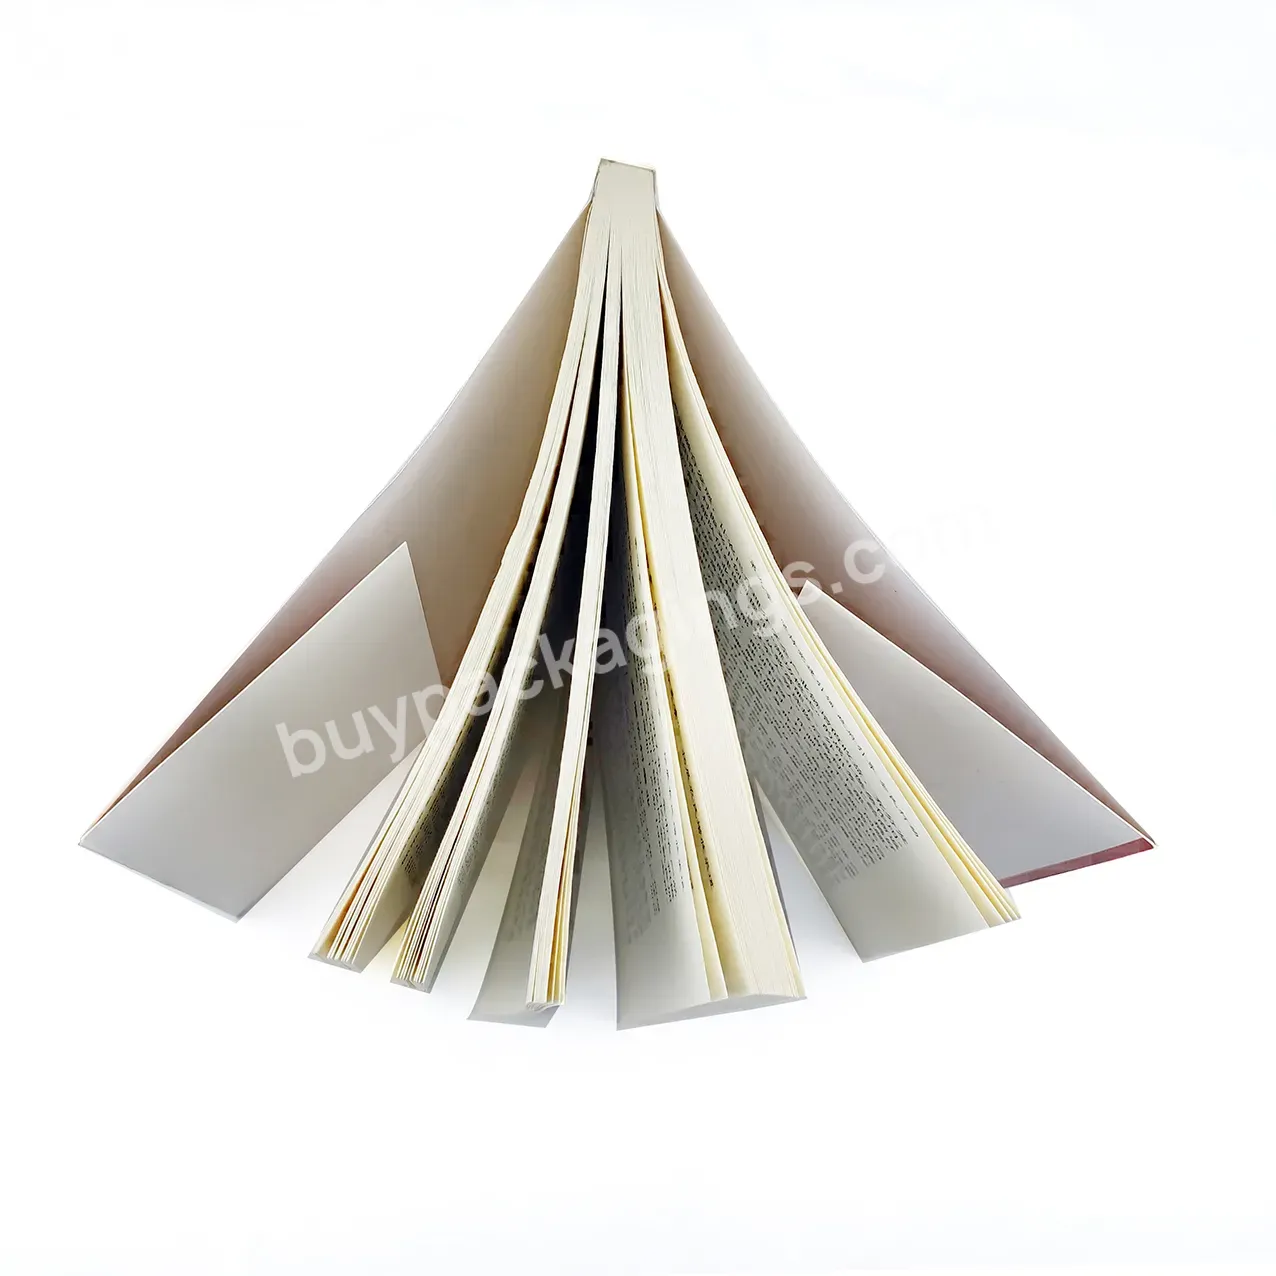 China Book Print Custom Cheap Price Softcover Book Coloring Publishing Service For Adults - Buy Book Publishing Service For Adults,Offset Publishing Books Journal Printing Service,China Book Print Custom.